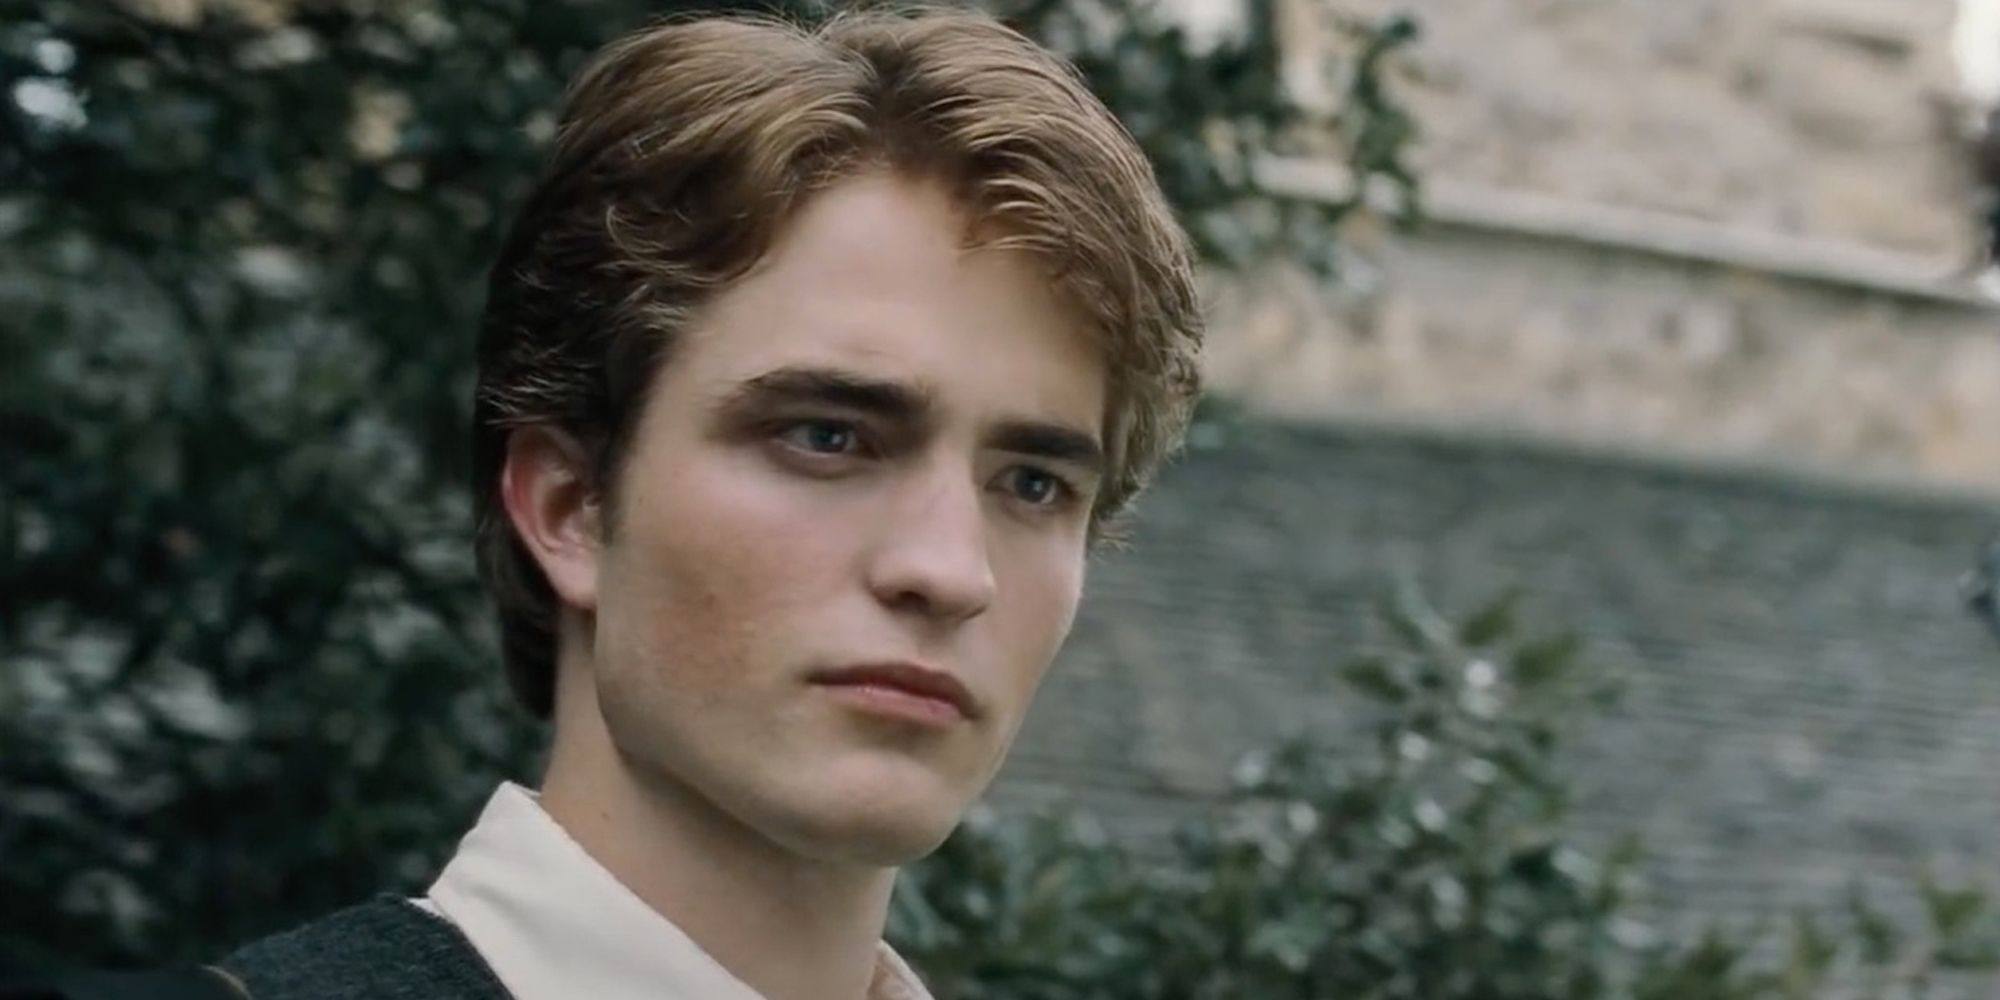 Robert Pattinson as Cedric Diggory In Harry Potter and the Goblet Of Fire